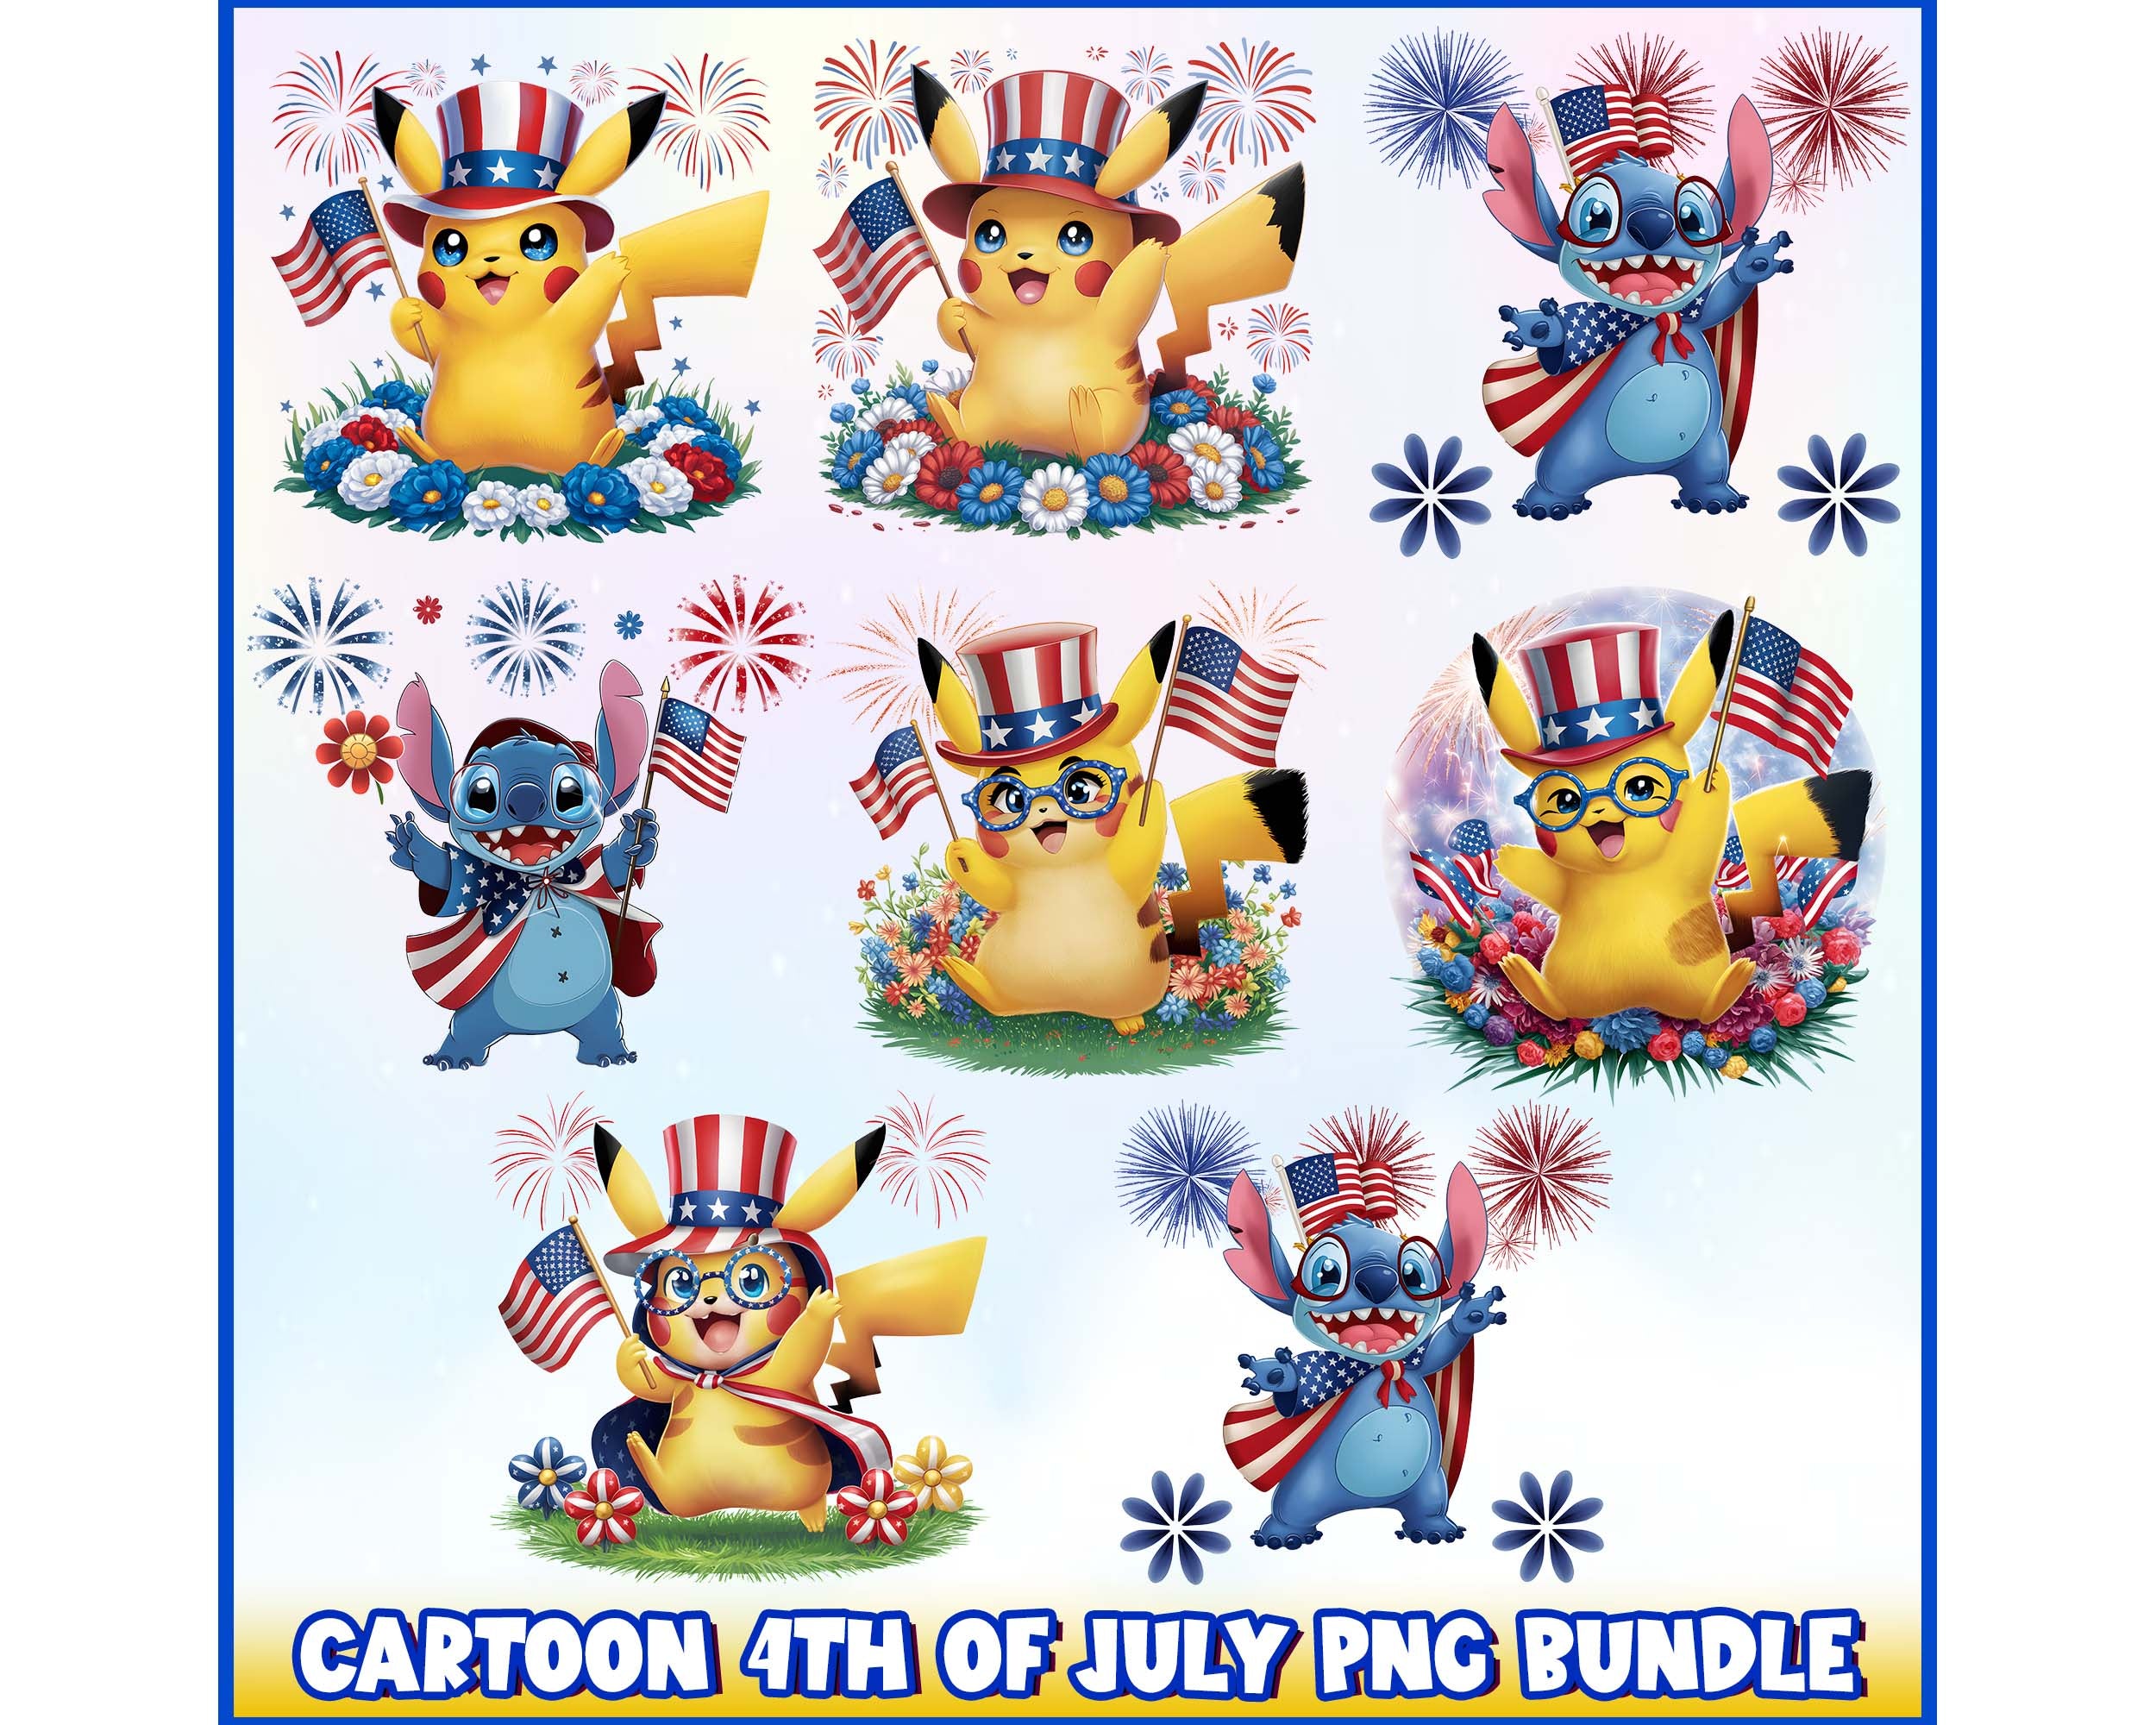 Cartoon 4th of July Png Bundle Instant Download